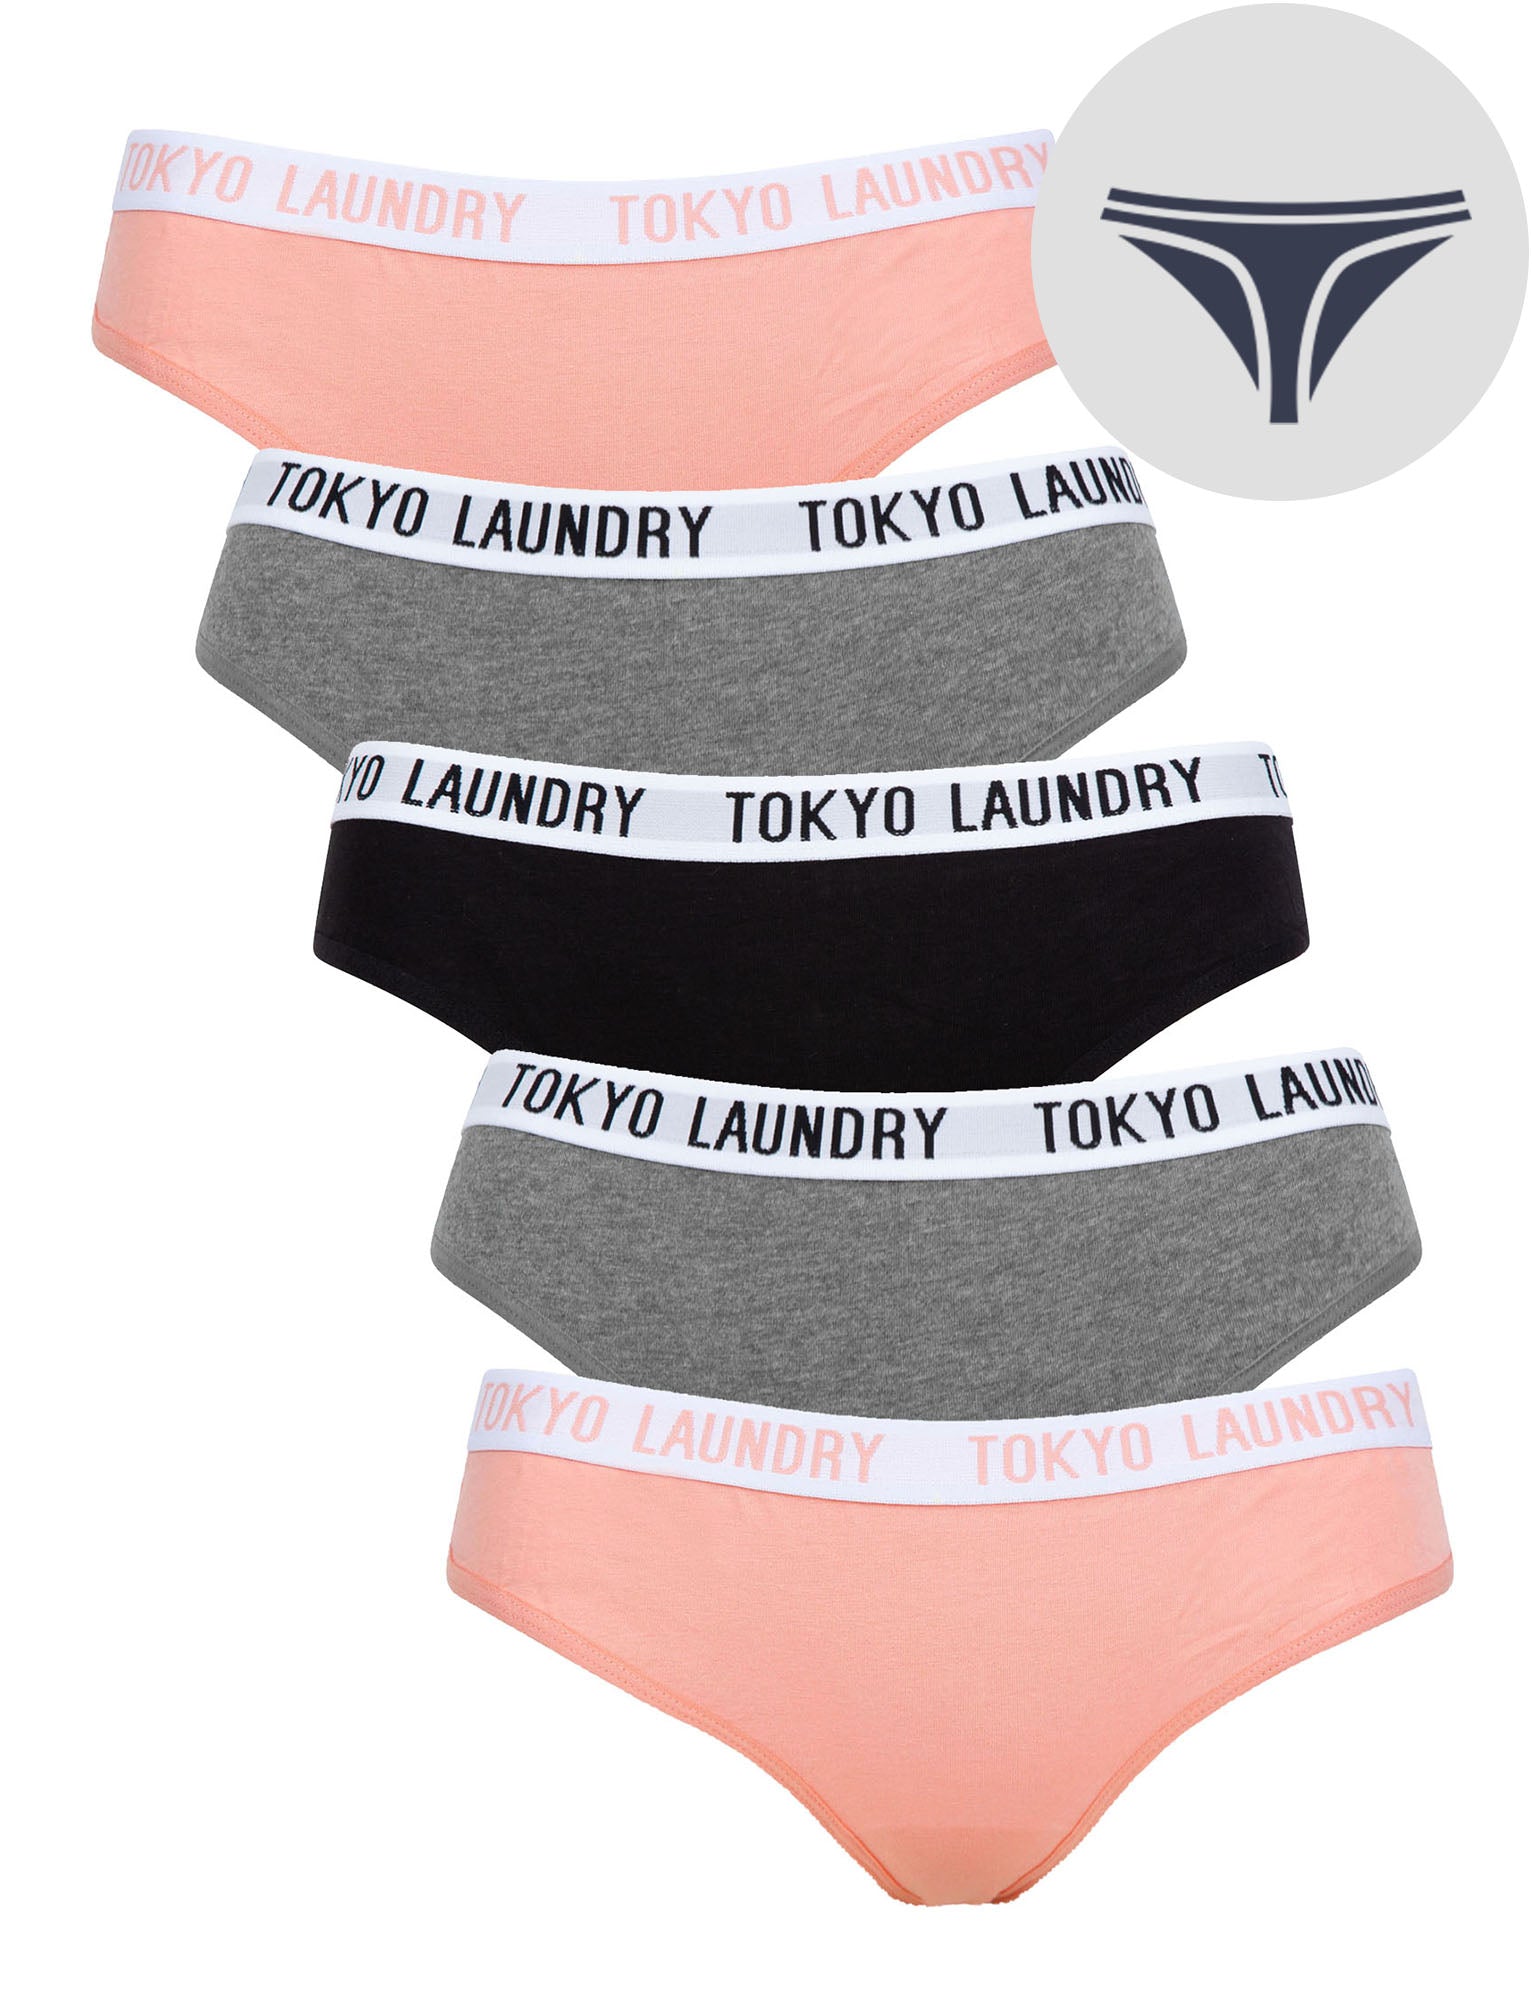 Womens Underwear Milla (5 Pack) Cotton Assorted Thongs in Bridal Rose / Mid Grey Marl / Jet Black - Tokyo Laundry / S - Tokyo Laundry